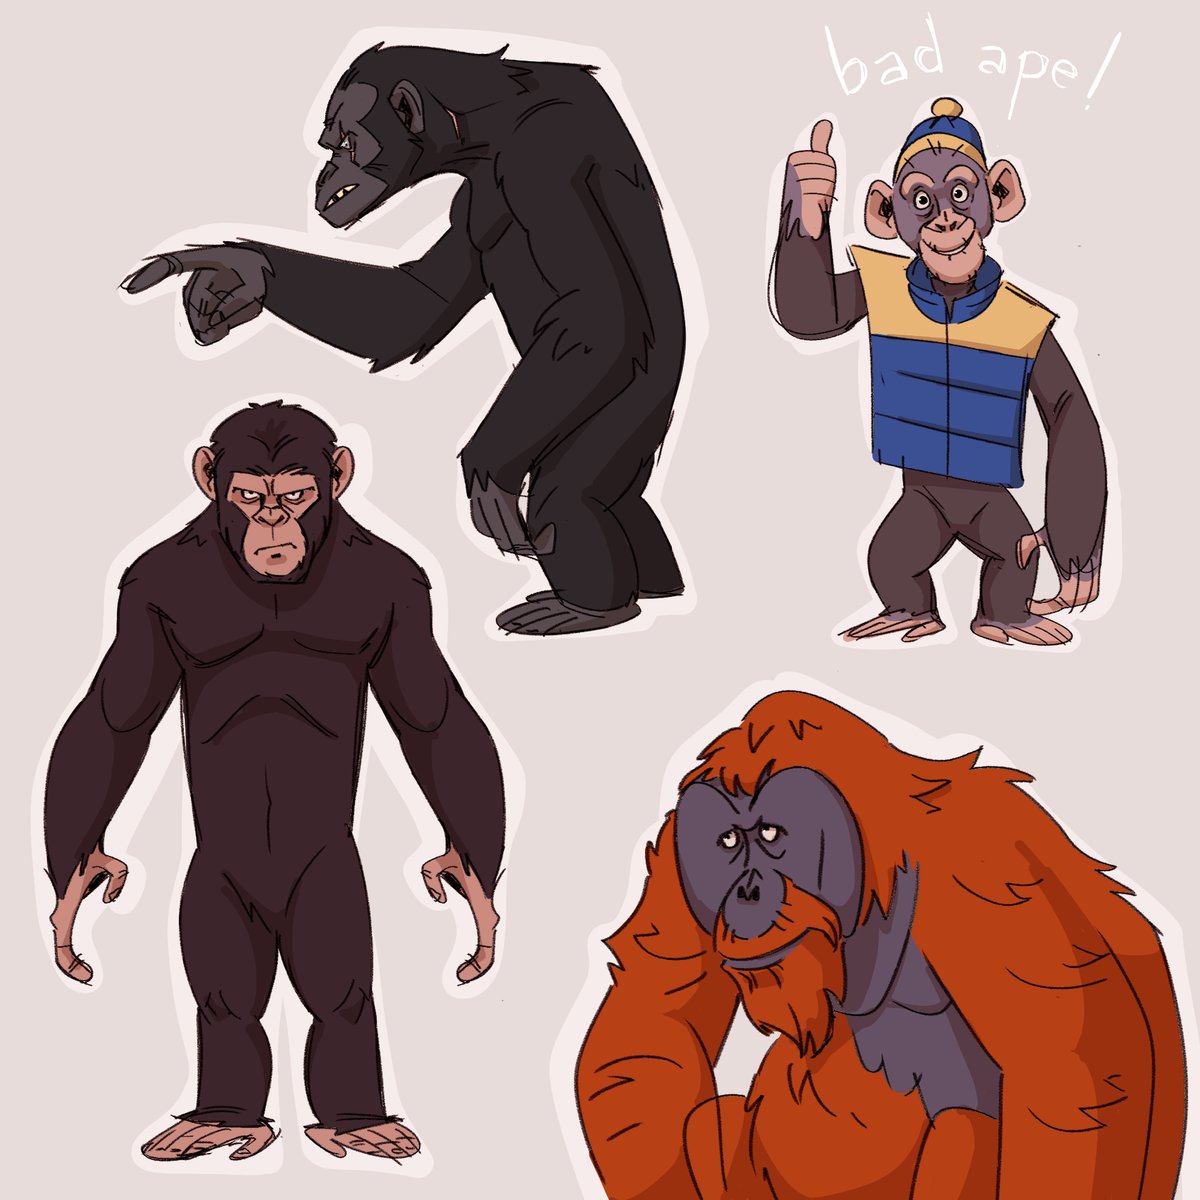 Caesar-verse animated? I dunno, I've just really wanted to play around with these characters I love to watch. Pick your fave! #planetoftheapes